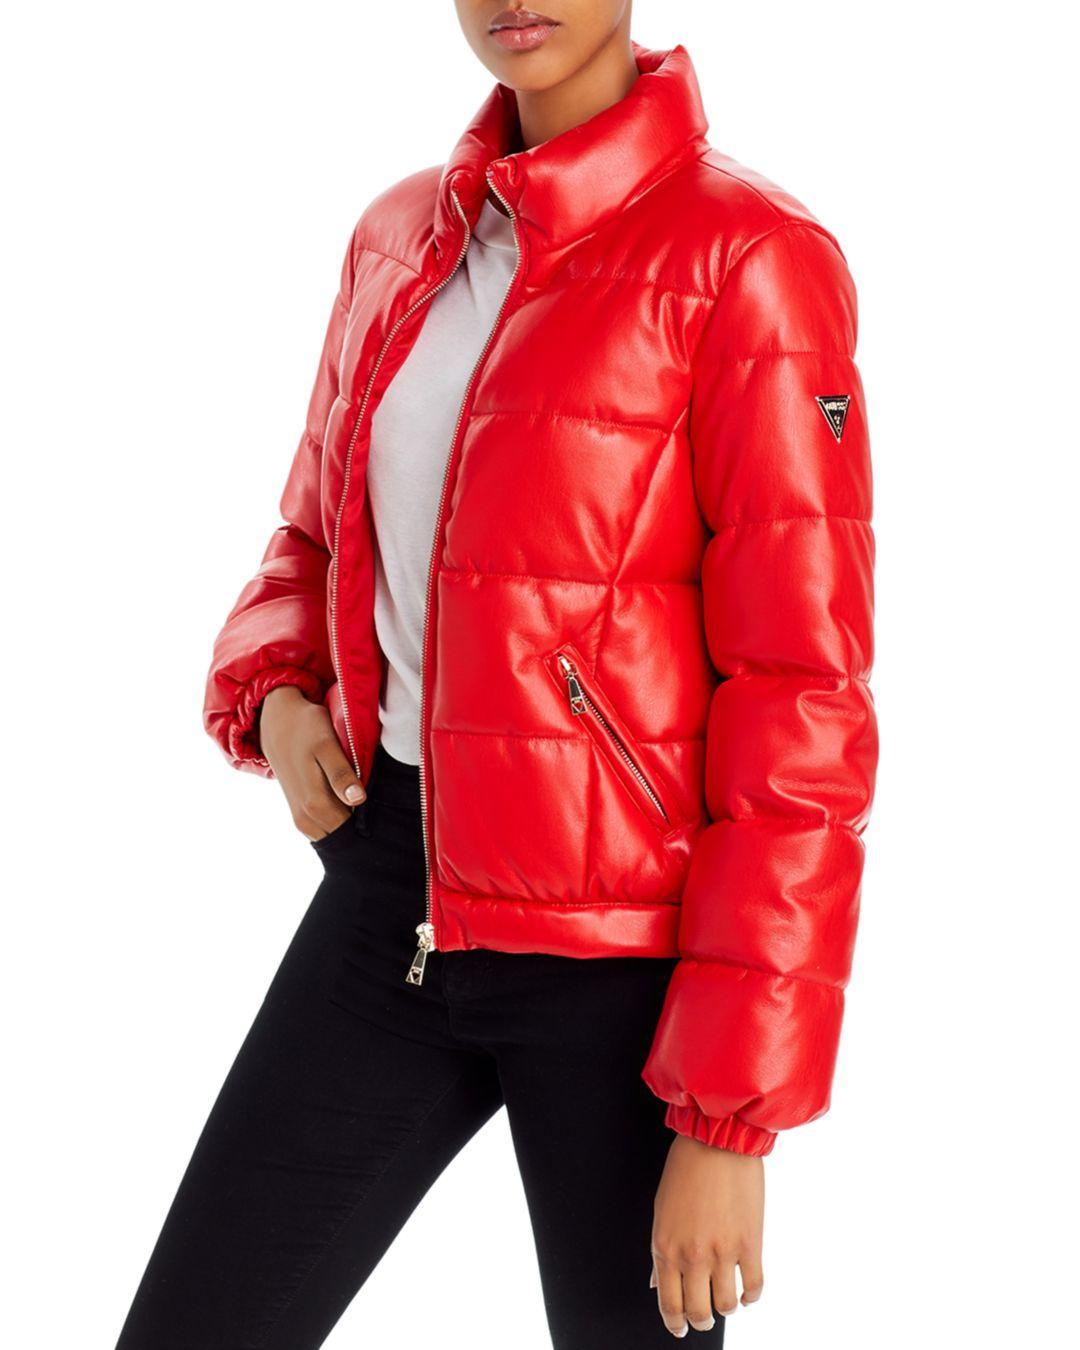 Guess Valetta Faux Leather Puffer Jacket in Red - Lyst